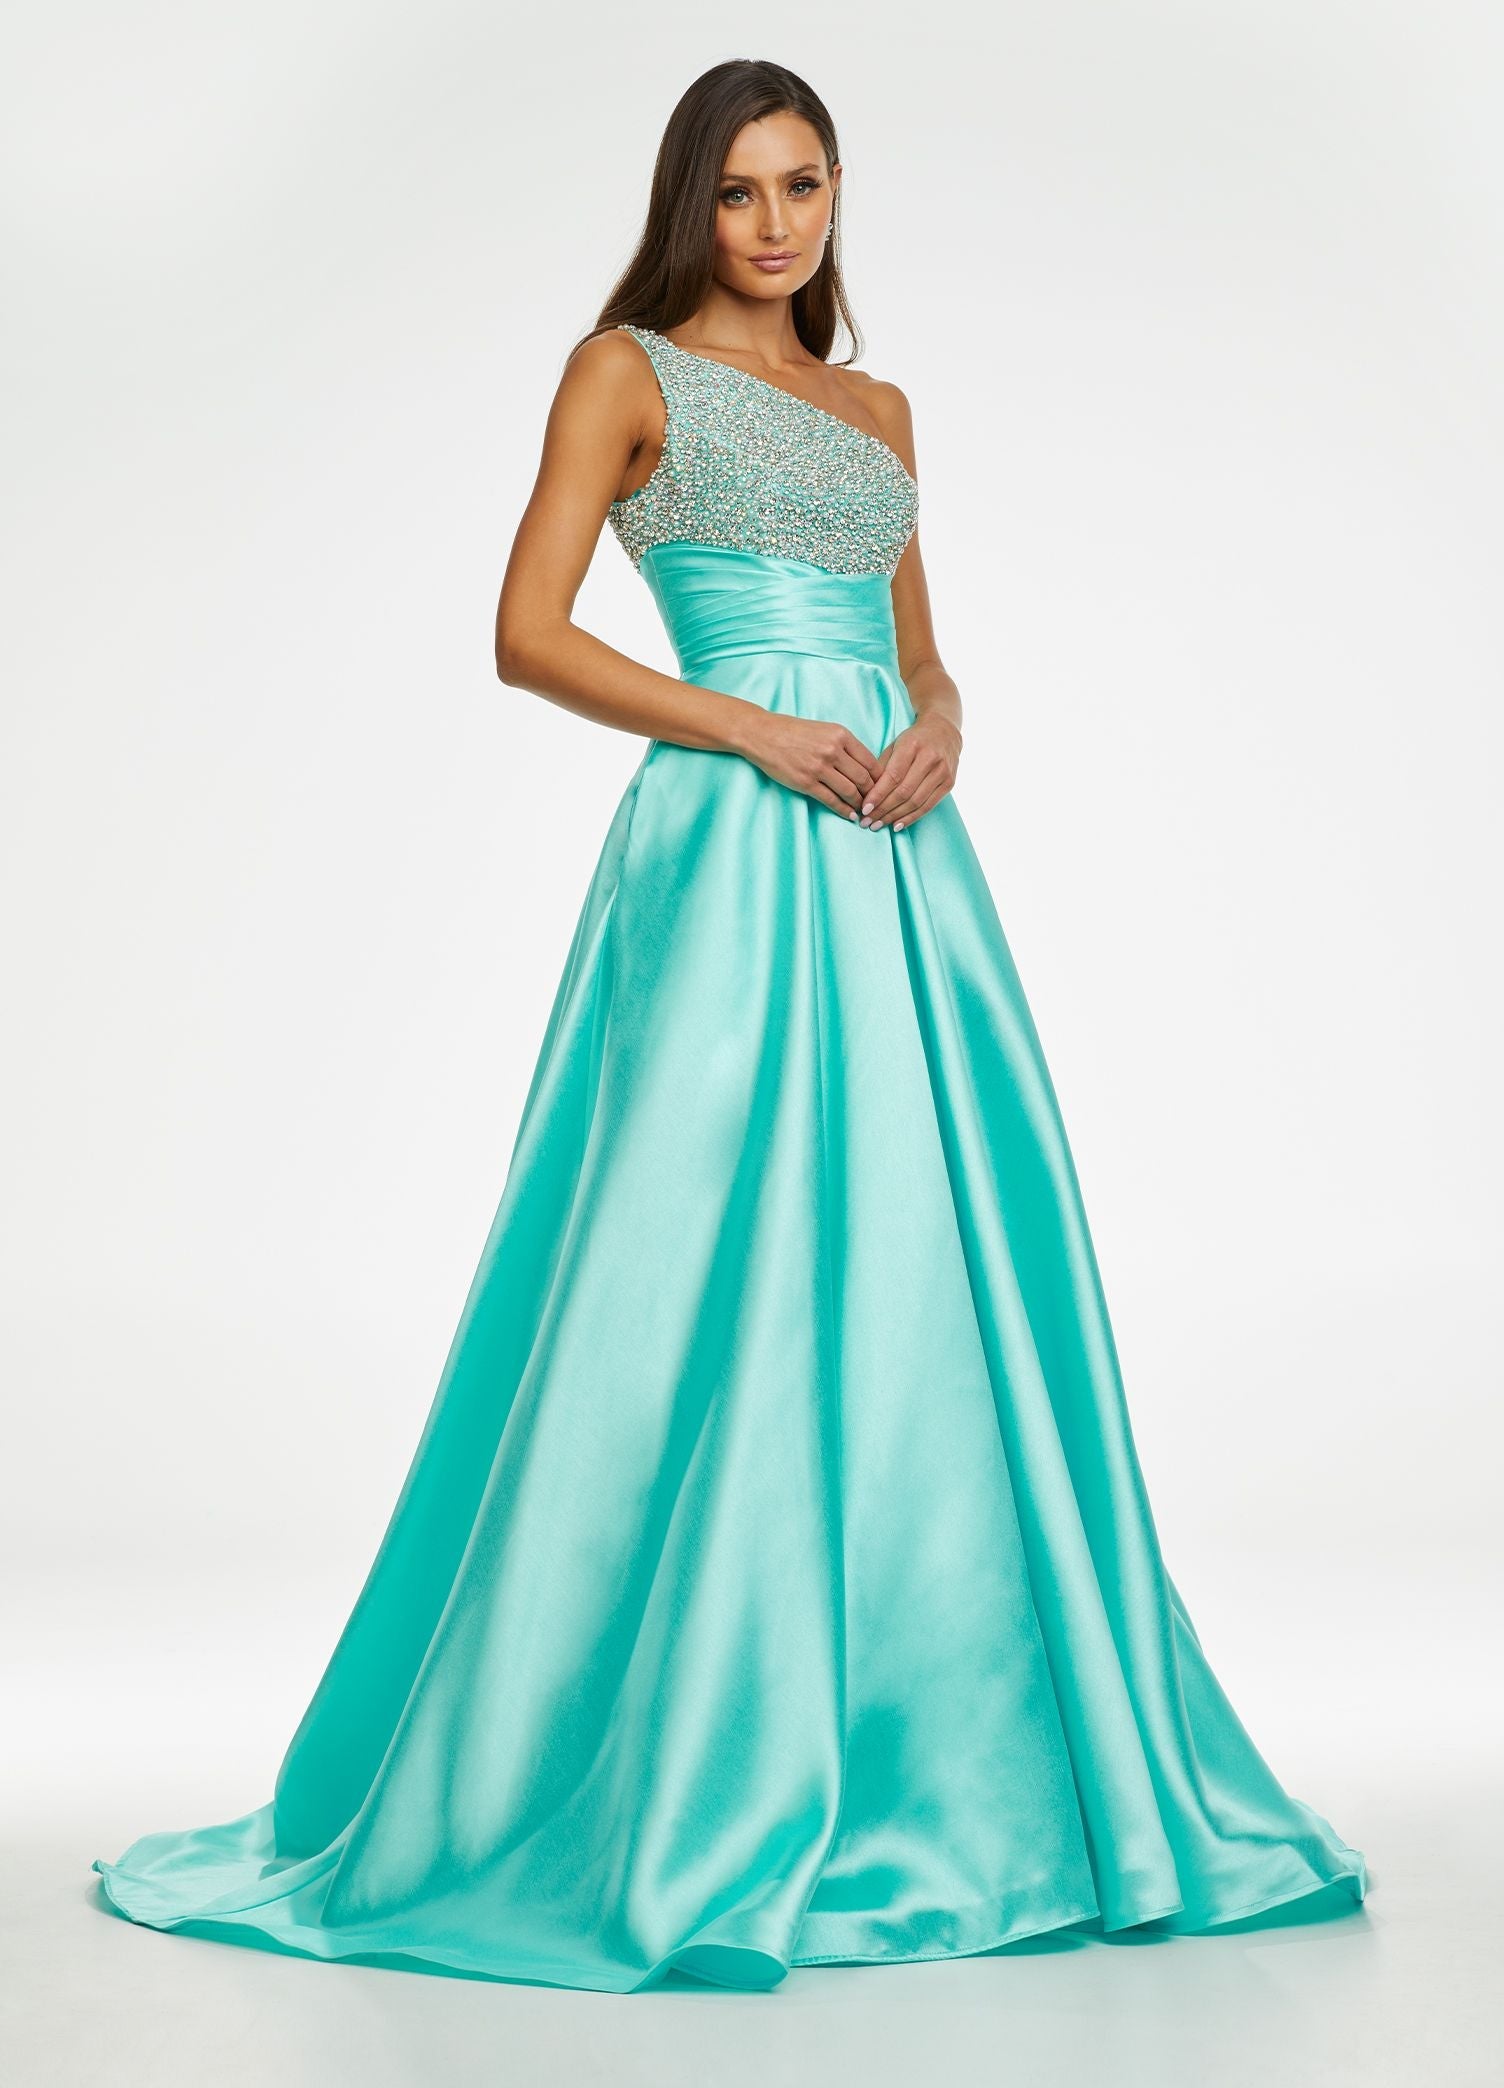 Ashley Lauren 11149 One Shoulder Ball Gown Prom Dress with Embellished Bodice  Sparkle in this one shoulder taffeta ball gown. The elegantly encrusted bustier is embellished with pearls and crystals that give way to wrap waistline. Did we mention is has pockets?!  One Shoulder Beaded Bustier Shimmer Taffeta Train Colors:  Sky, Aqua, Pink, White Sizes:  0-16